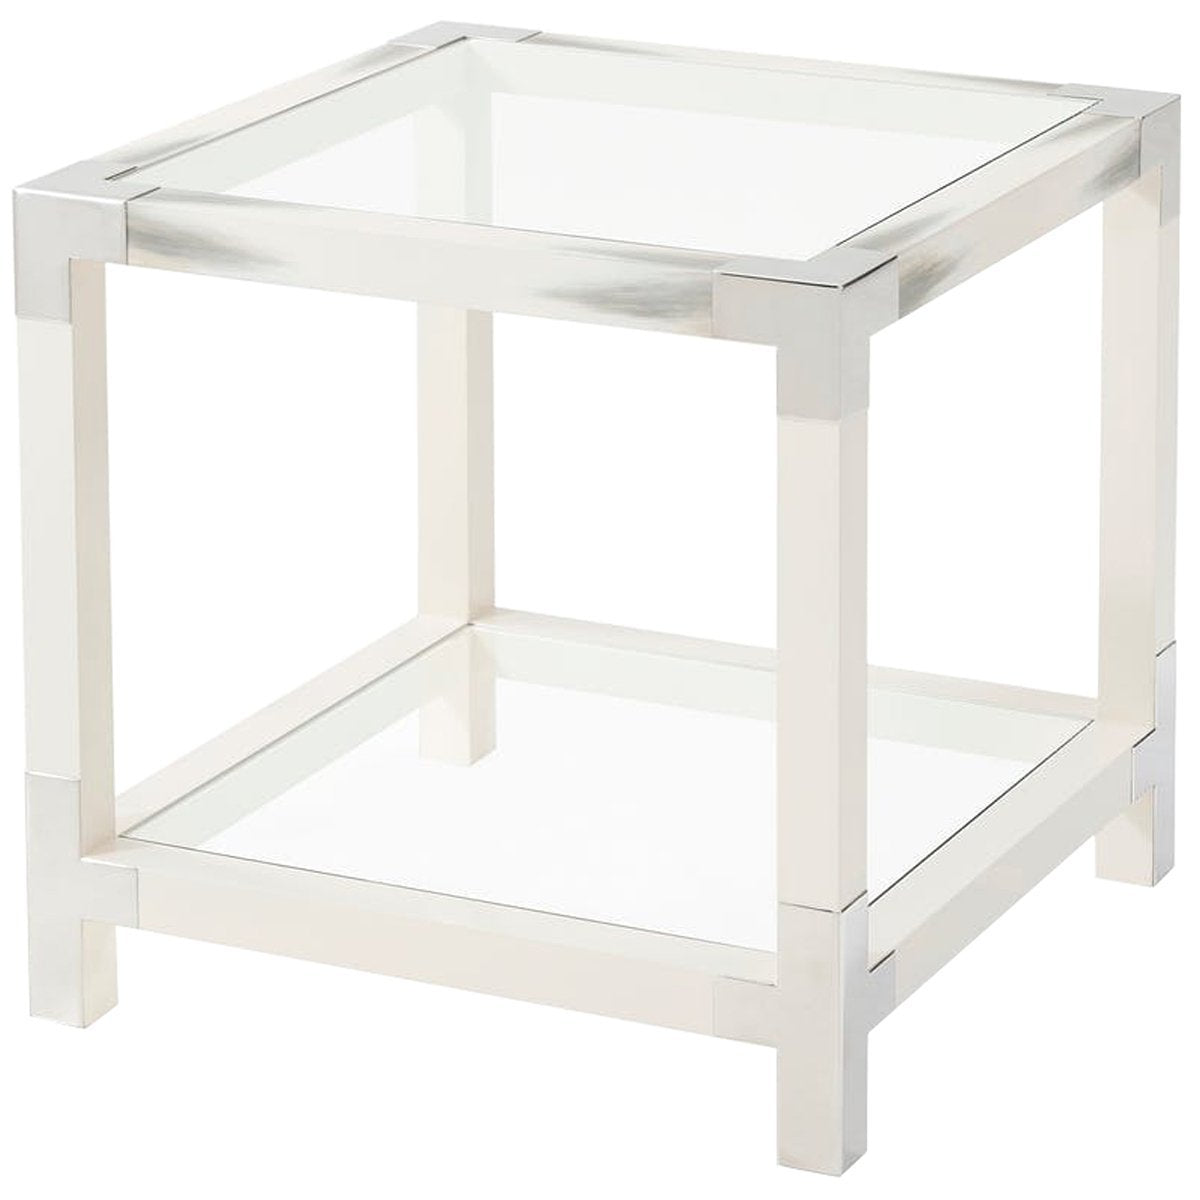 Theodore Alexander Cutting Edge Accent Table - Longhorn White